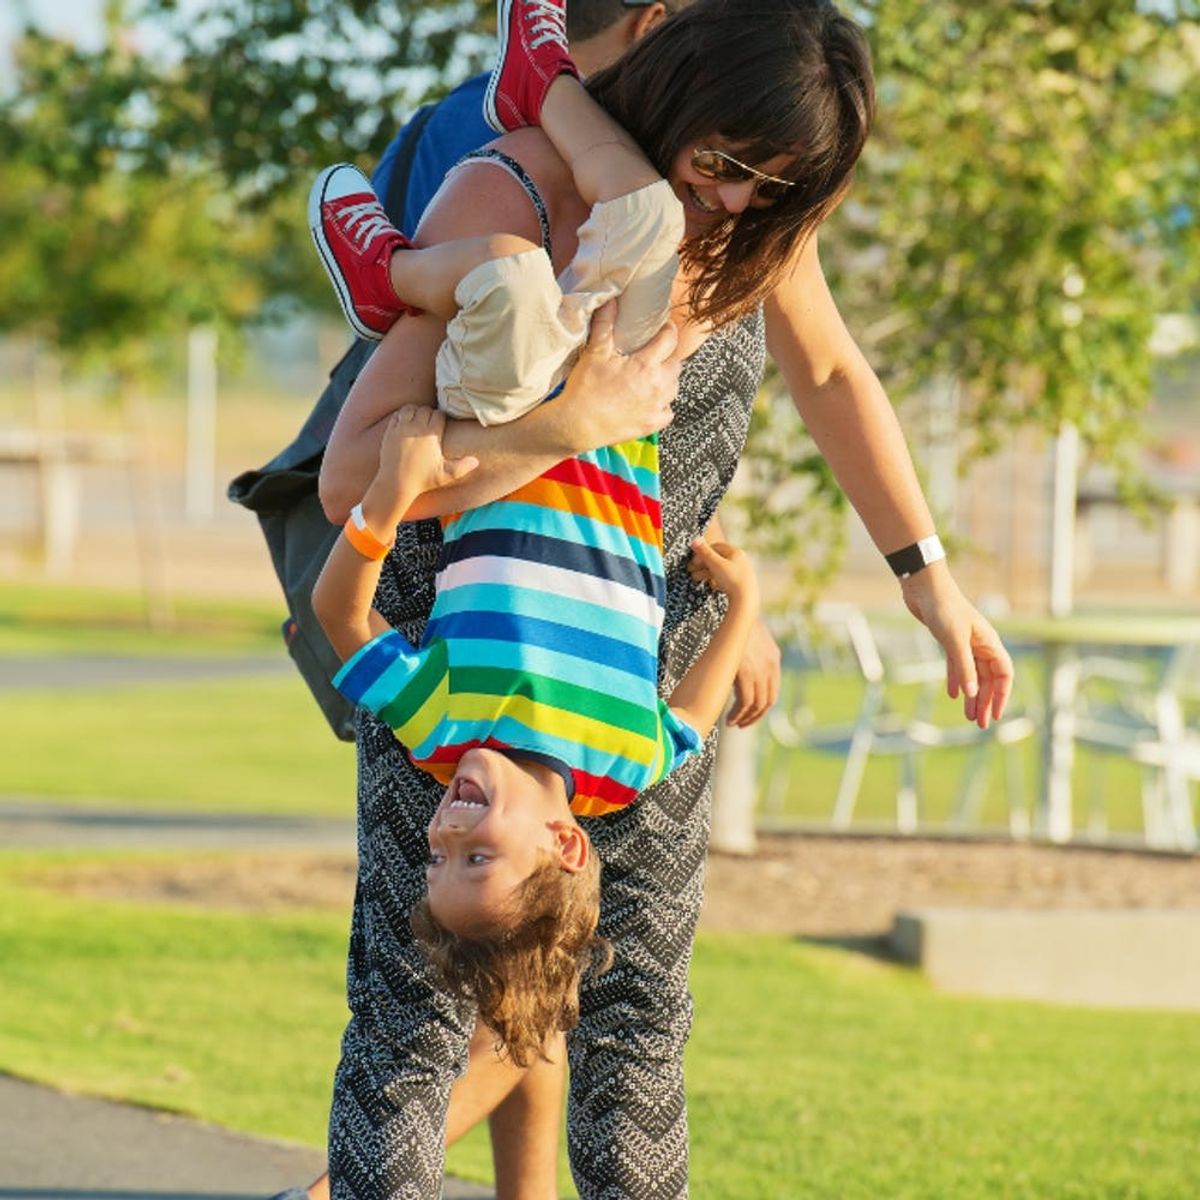 9 Reasons for Moms to Put Themselves First